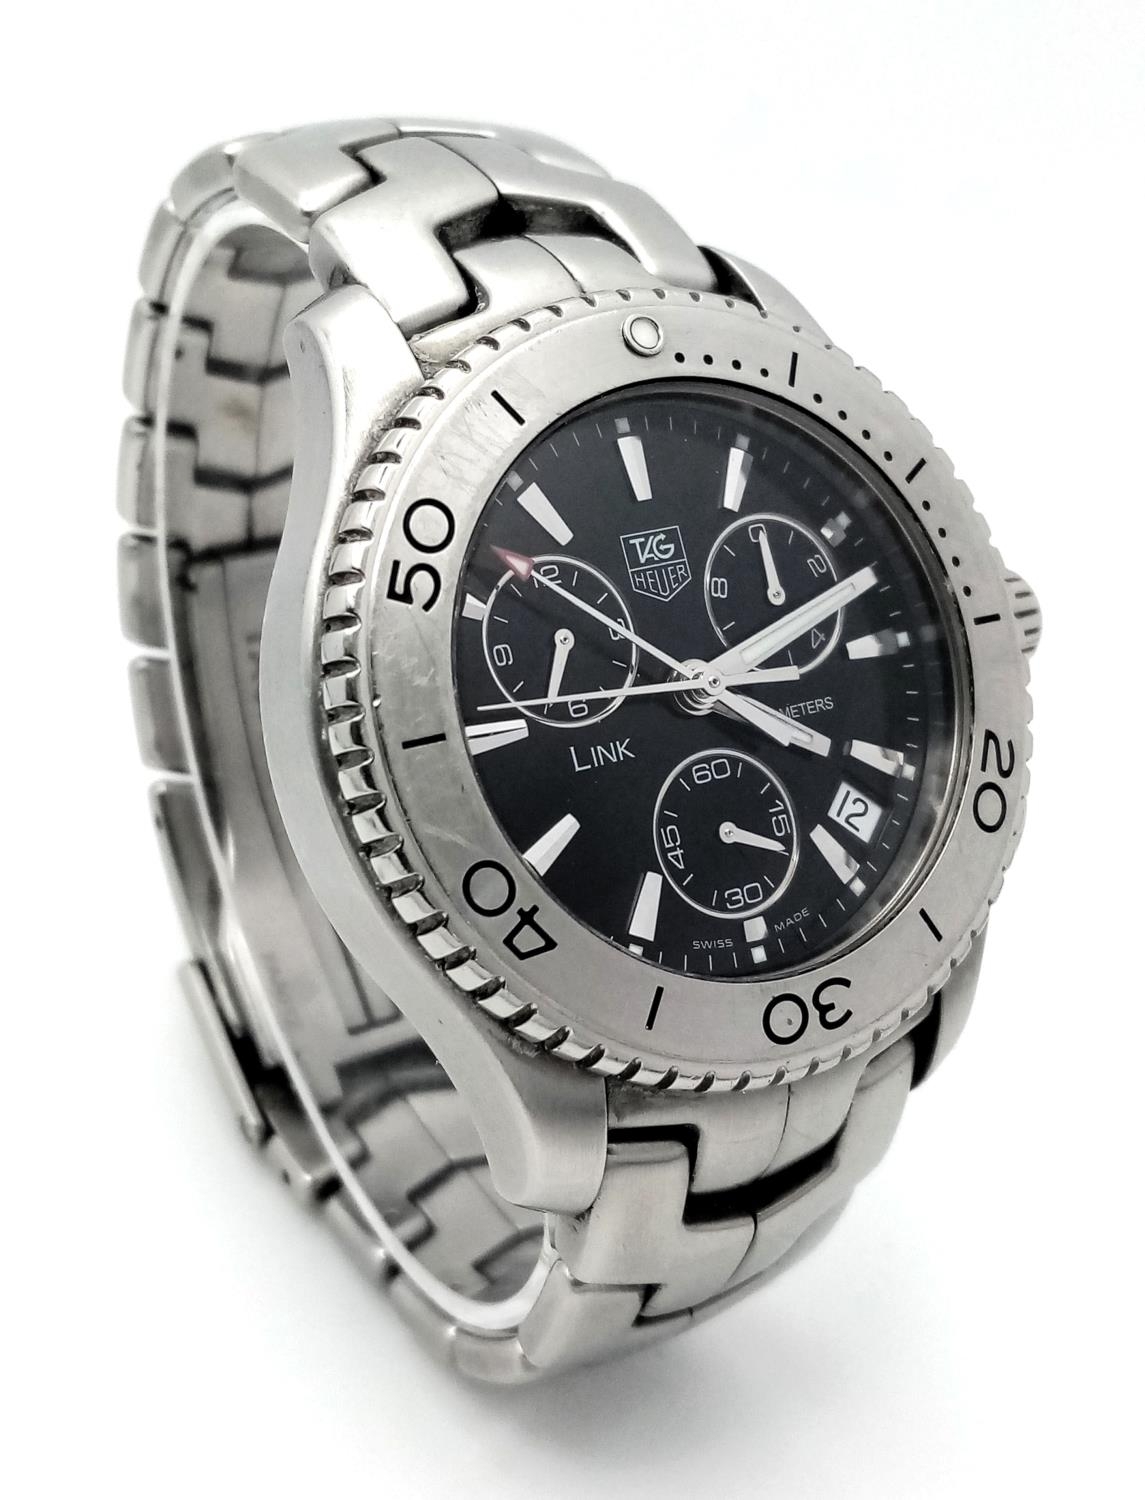 A Tag Heuer Link Quartz Chronograph Gents Watch. Stainless steel bracelet and case - 42mm. Black - Image 3 of 8